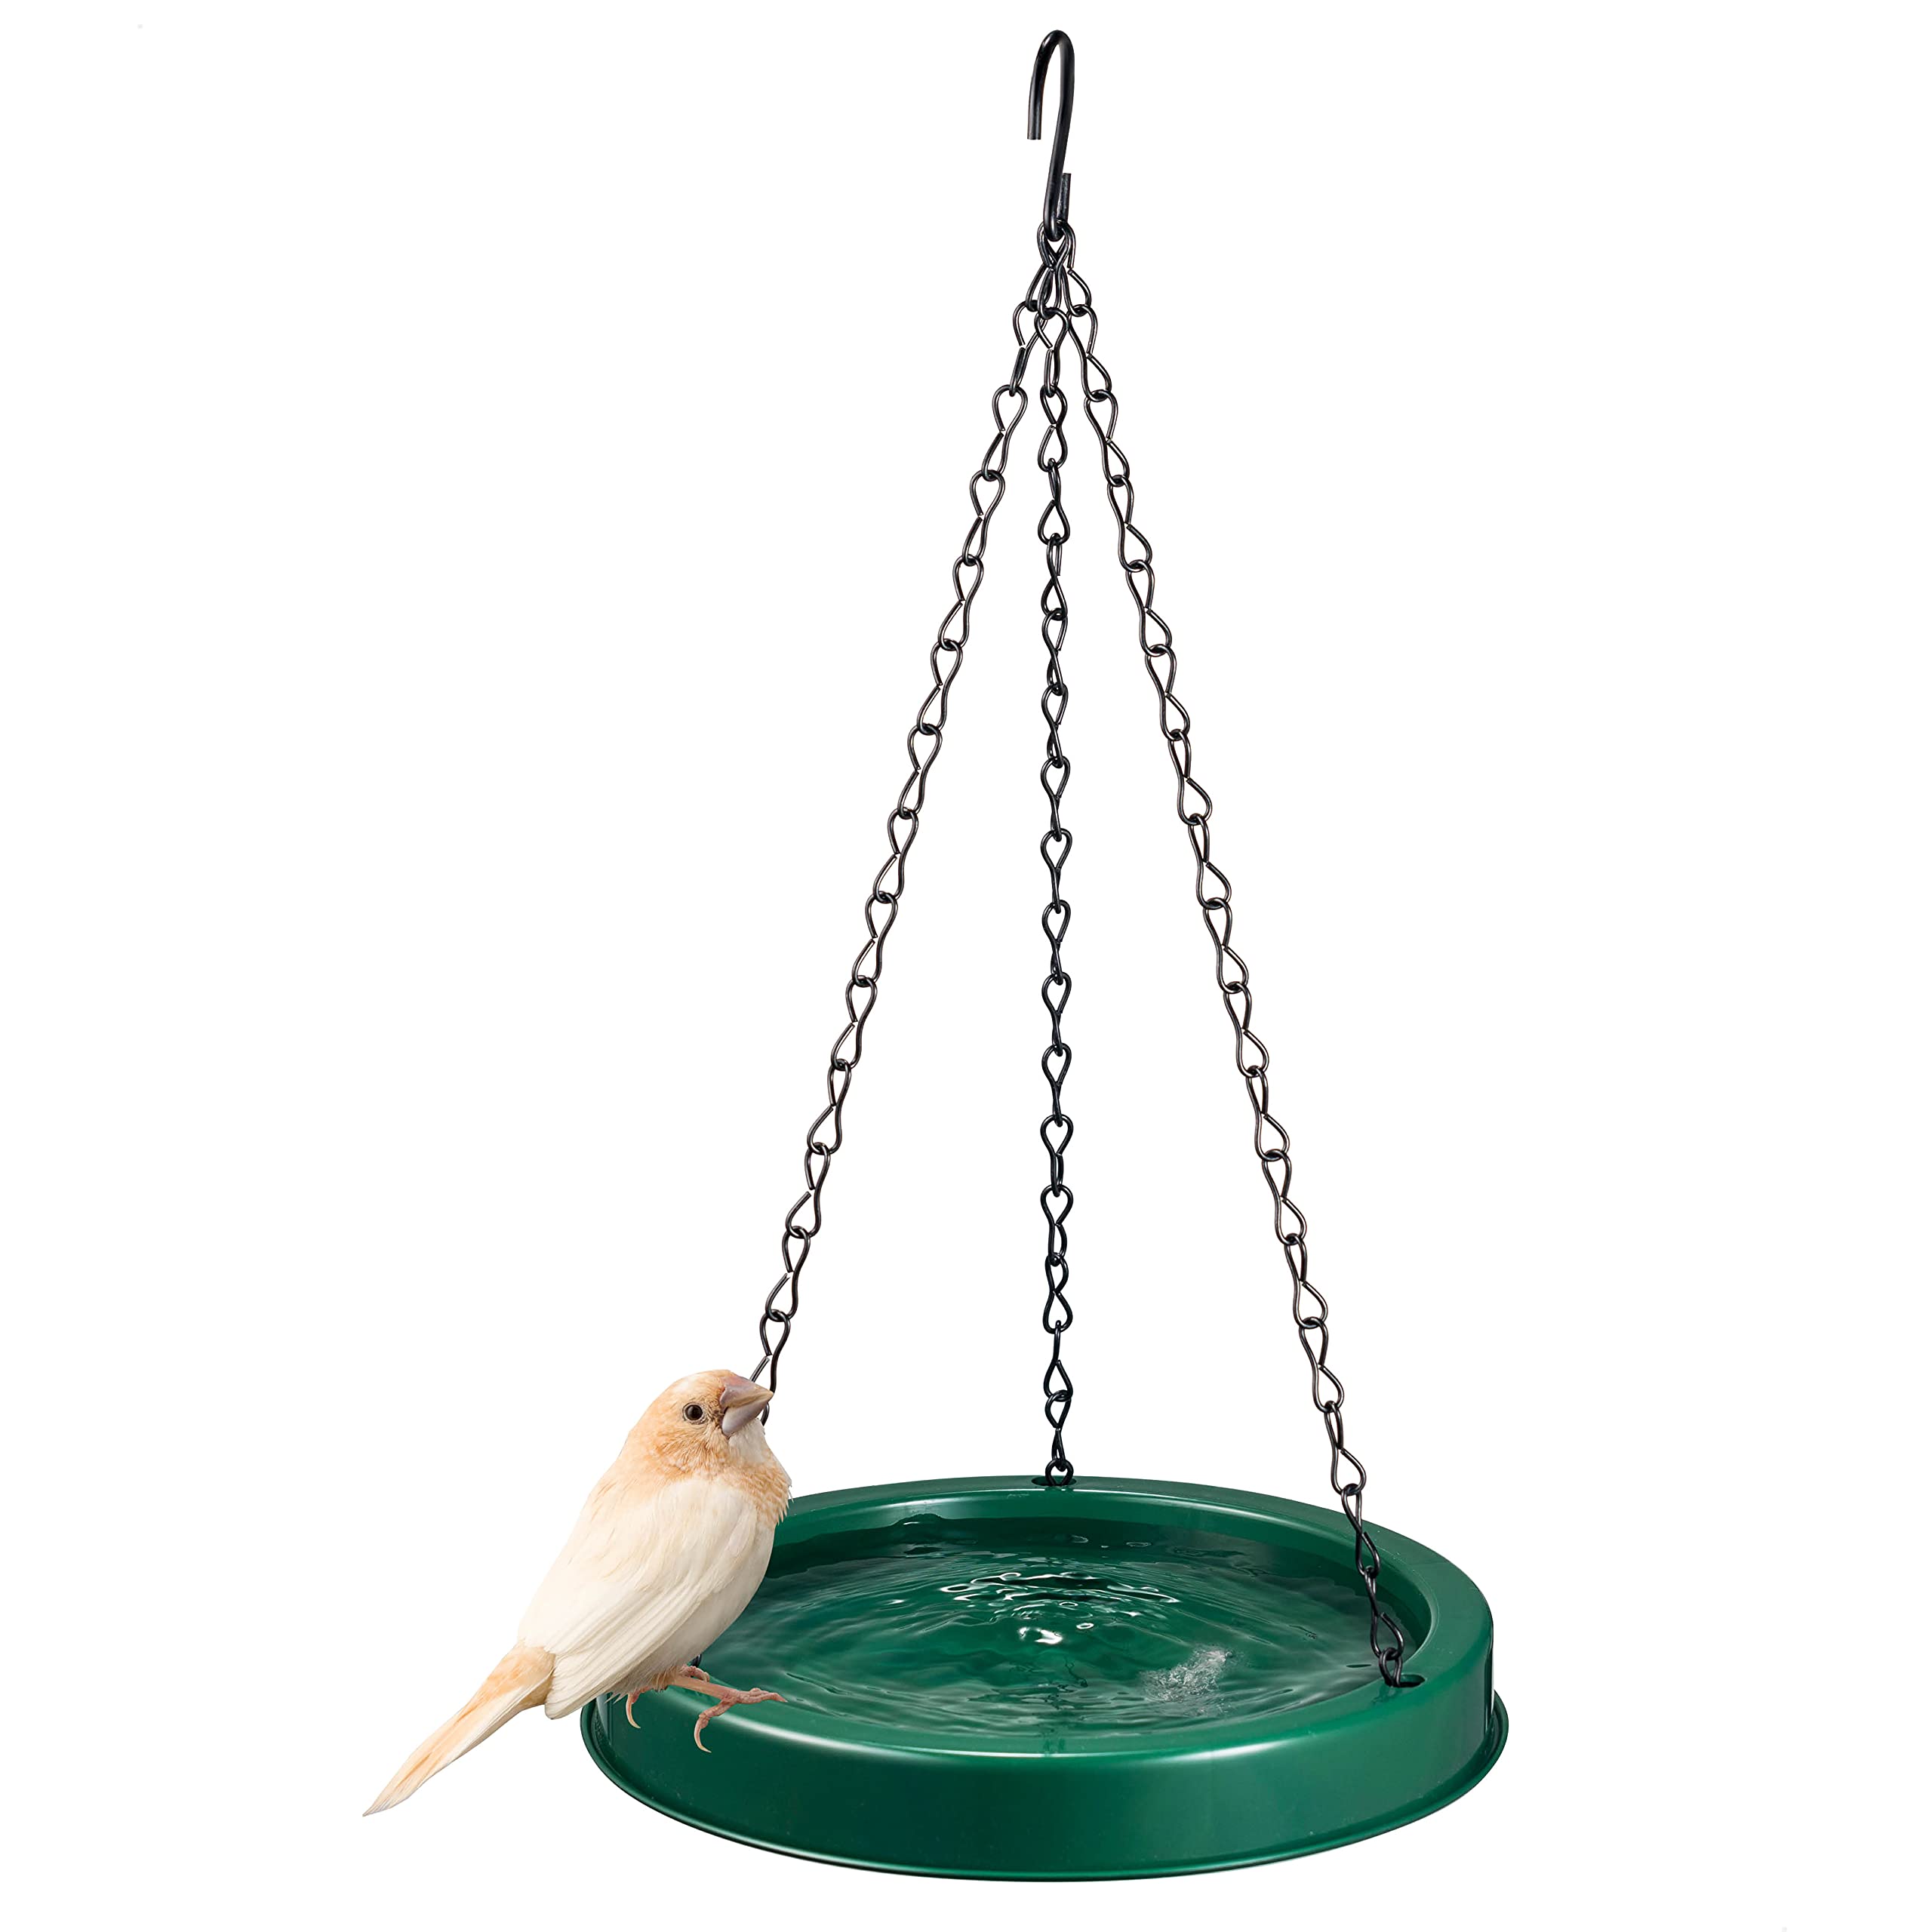 Hummingbird Feeder 10 oz Plastic Feeders for Outdoors, with Built-in Ant Guard - Wide Mouth for Easy Filling - 2 Part Base for Easy Cleaning - Circular Perch with 5 Feeding Ports 8  - Like New